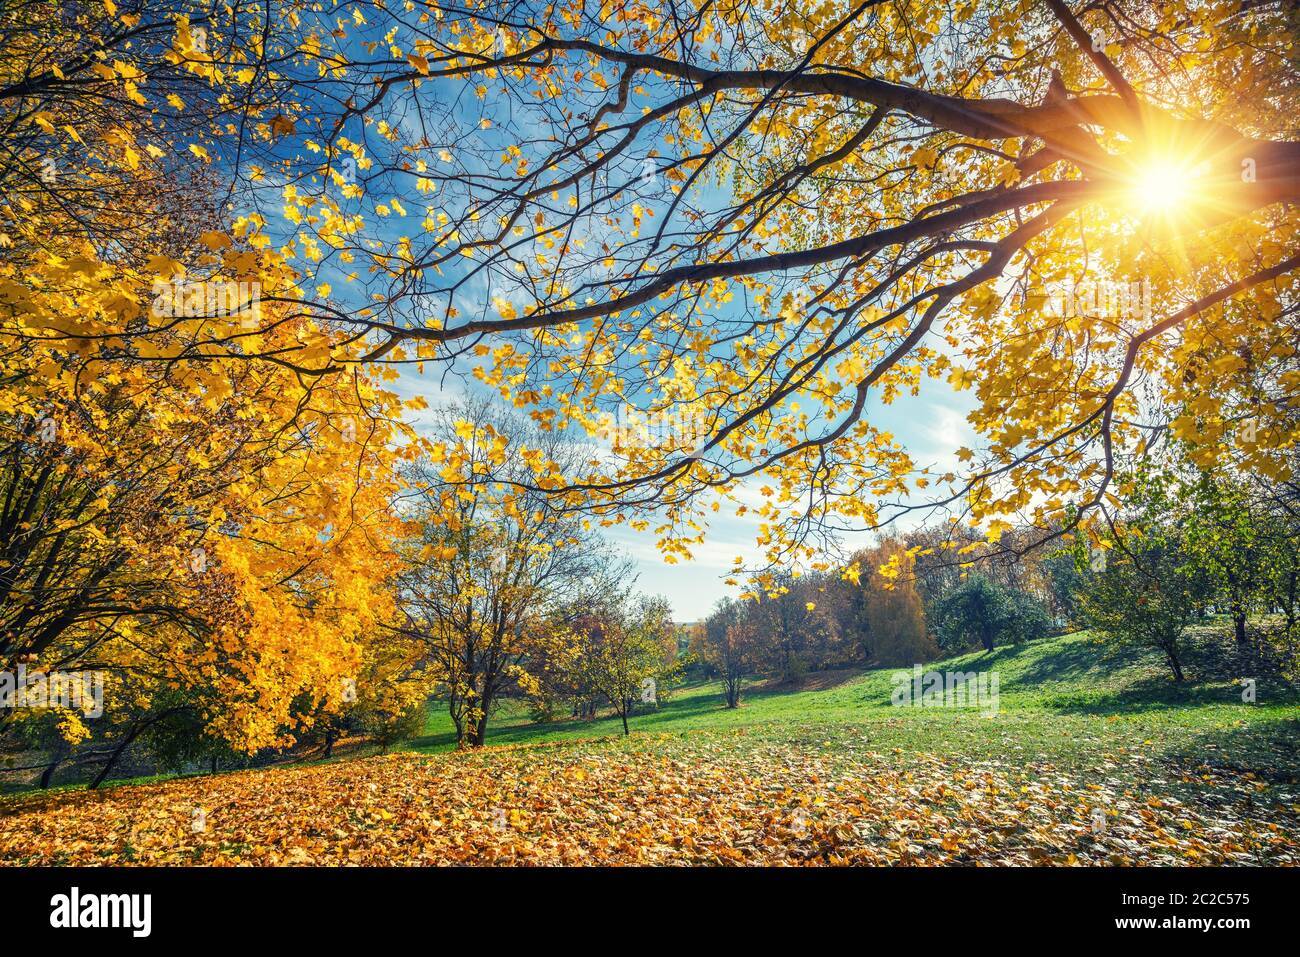 Sunny autumn landscape with golden trees and blue sky in countryside Stock Photo